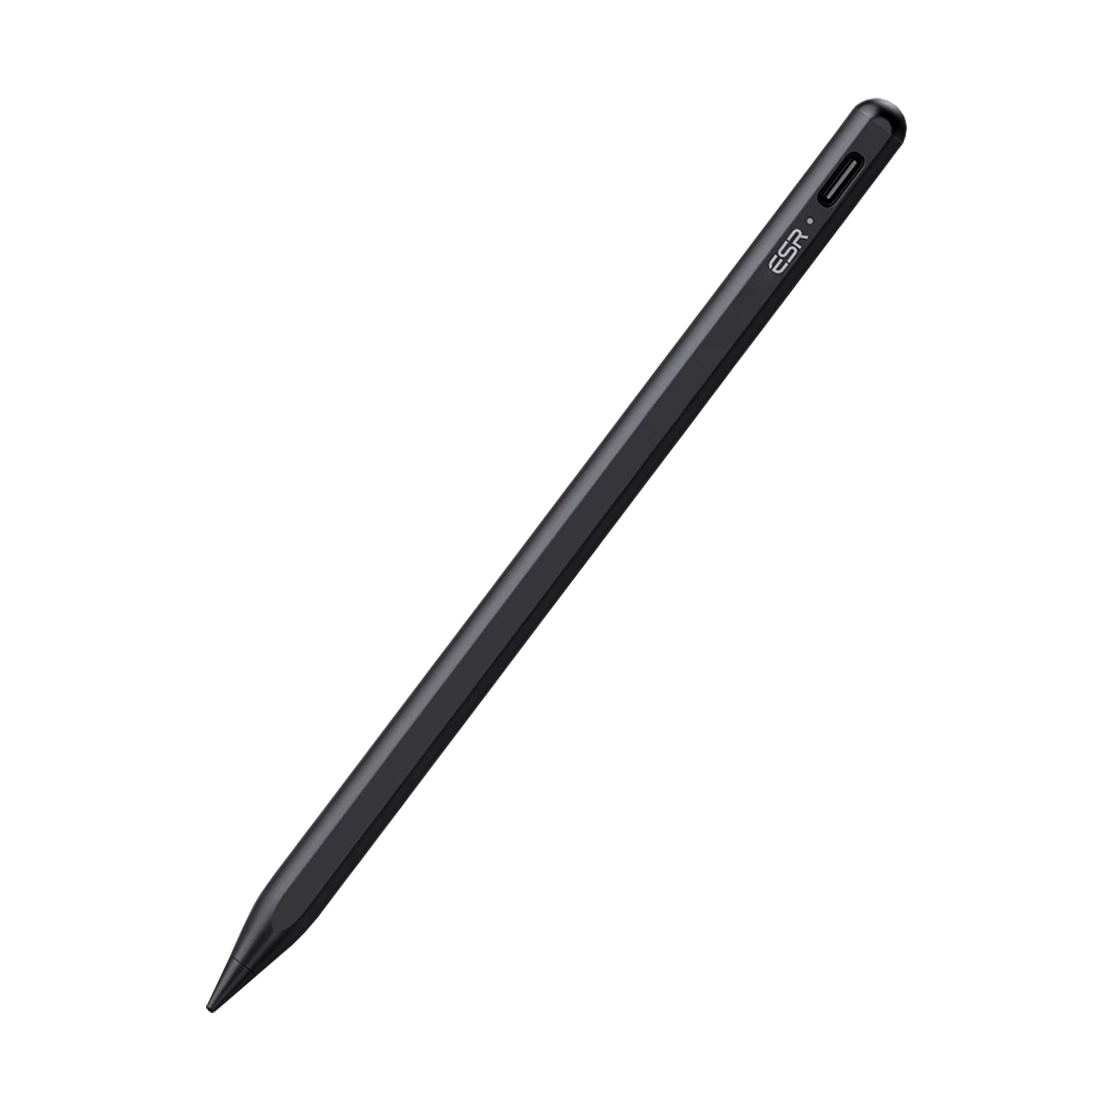 ESR Digital Stylus for All Touch Screen Devices